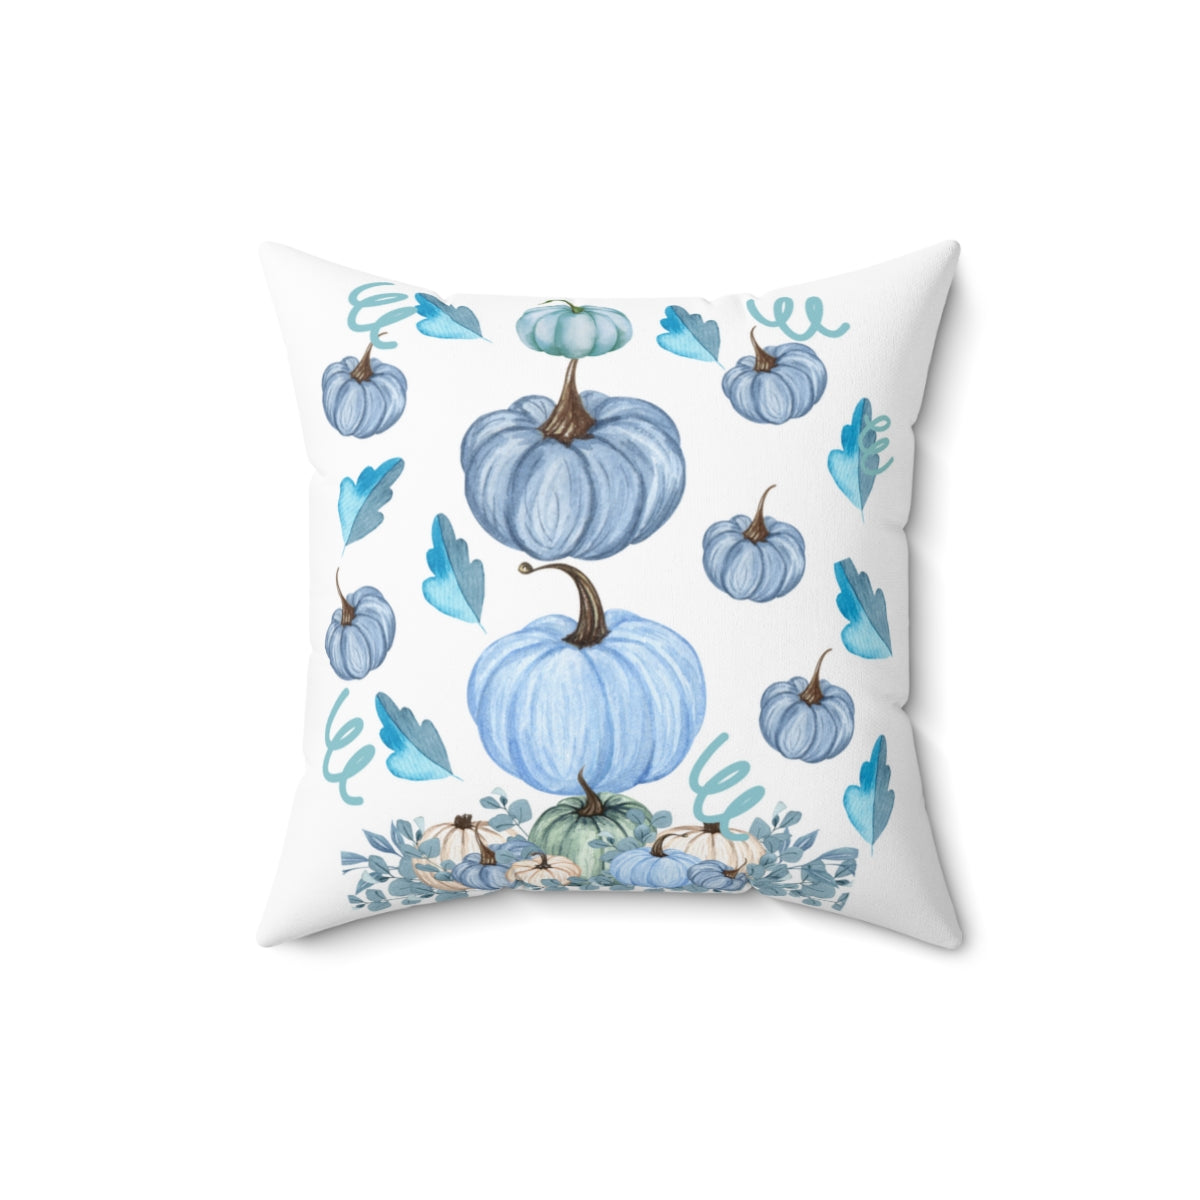 blue pumpkin pillow with blue pumpkins and leaves for fall, halloween or thanksgiving